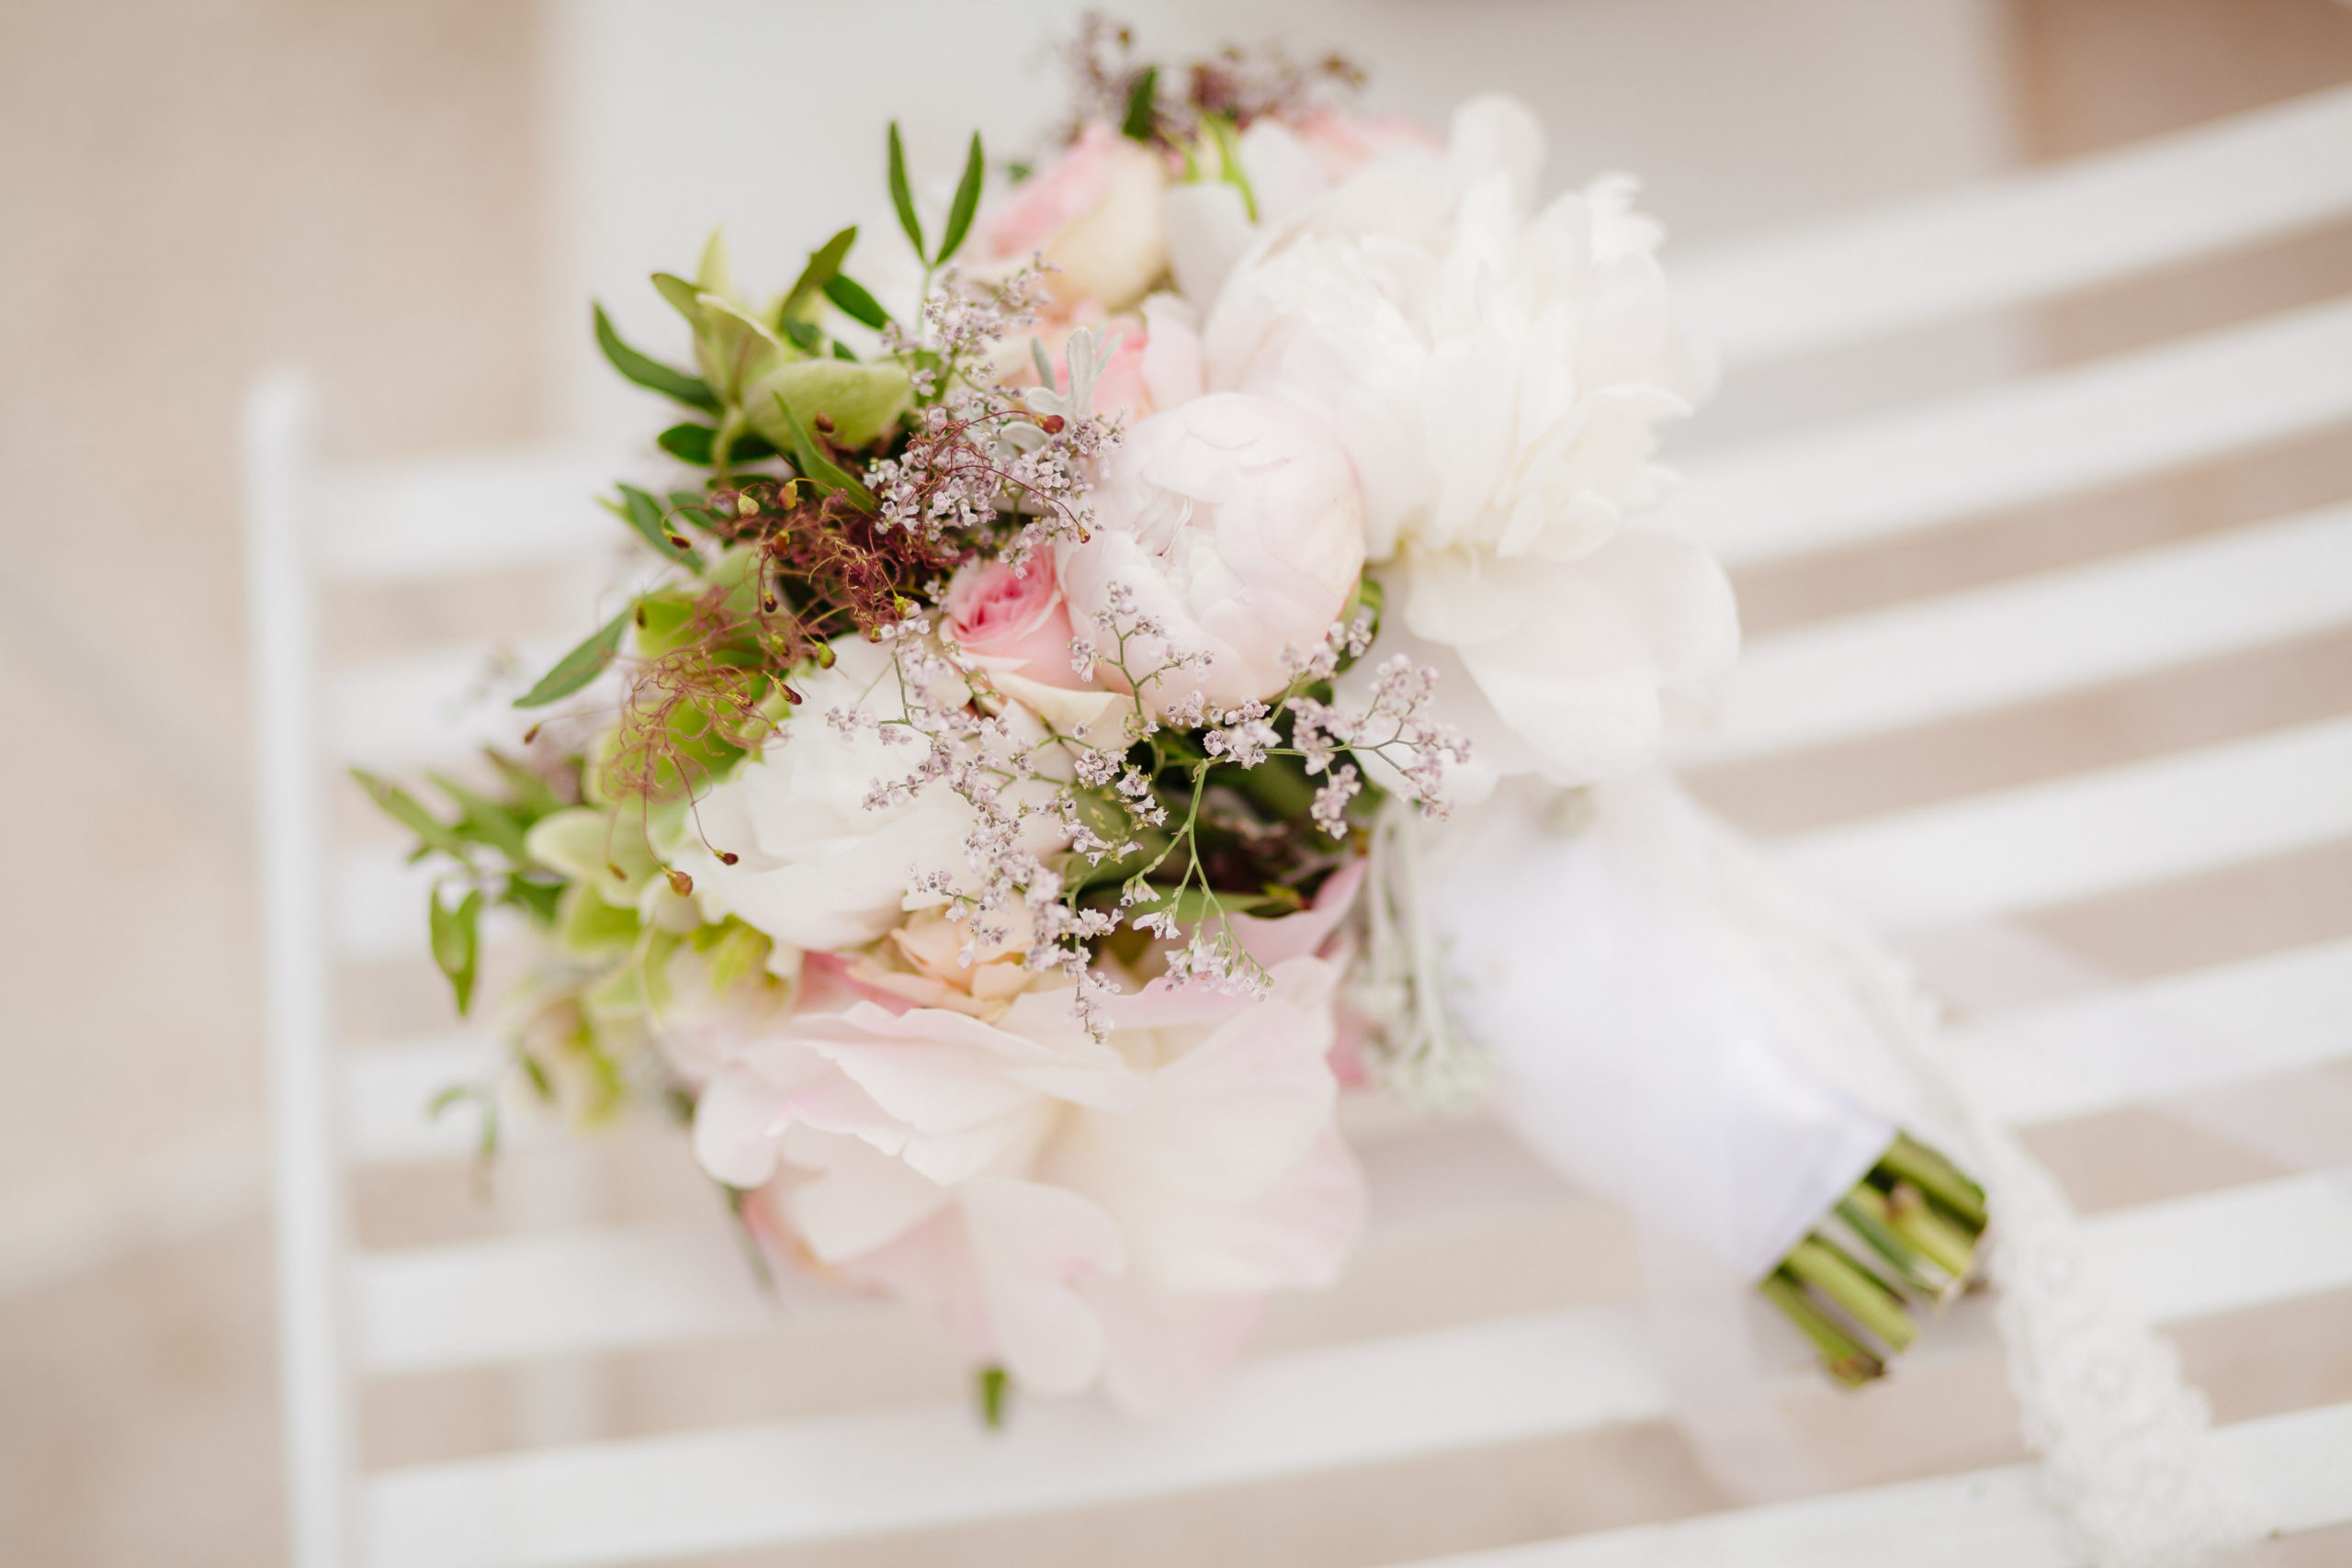 How To Make Wedding Bouquets With Fresh Flowers - Rachel Cho Floral Design